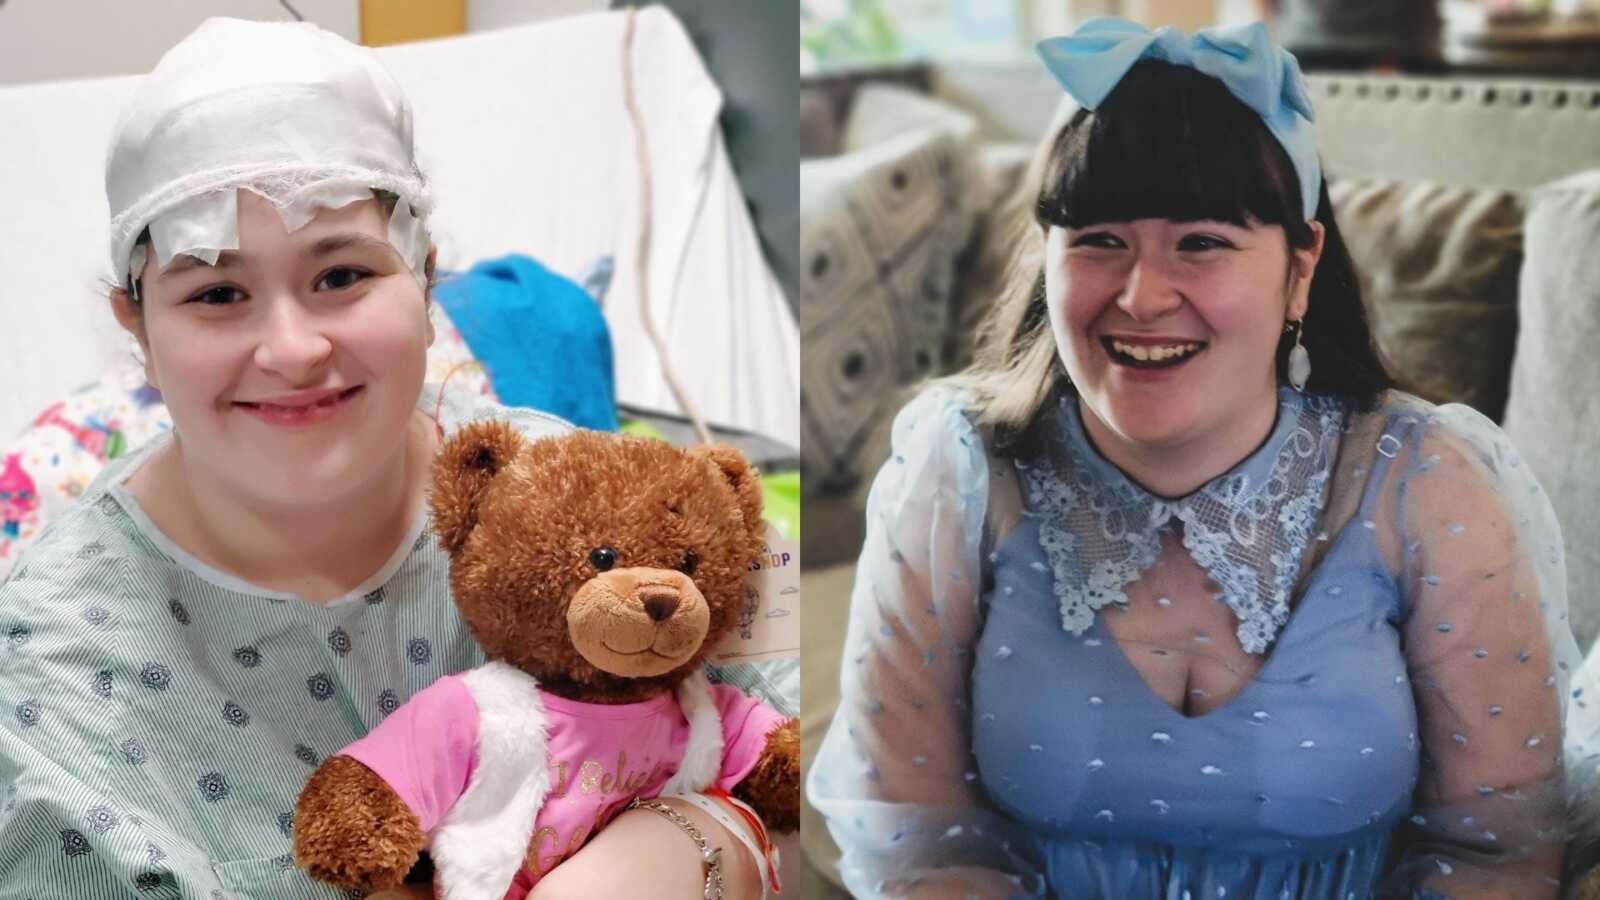 On the left, young girl with epilepsy sits in a hospital bed, on the right, same girl smiles big at her surprise Sweet 16 party